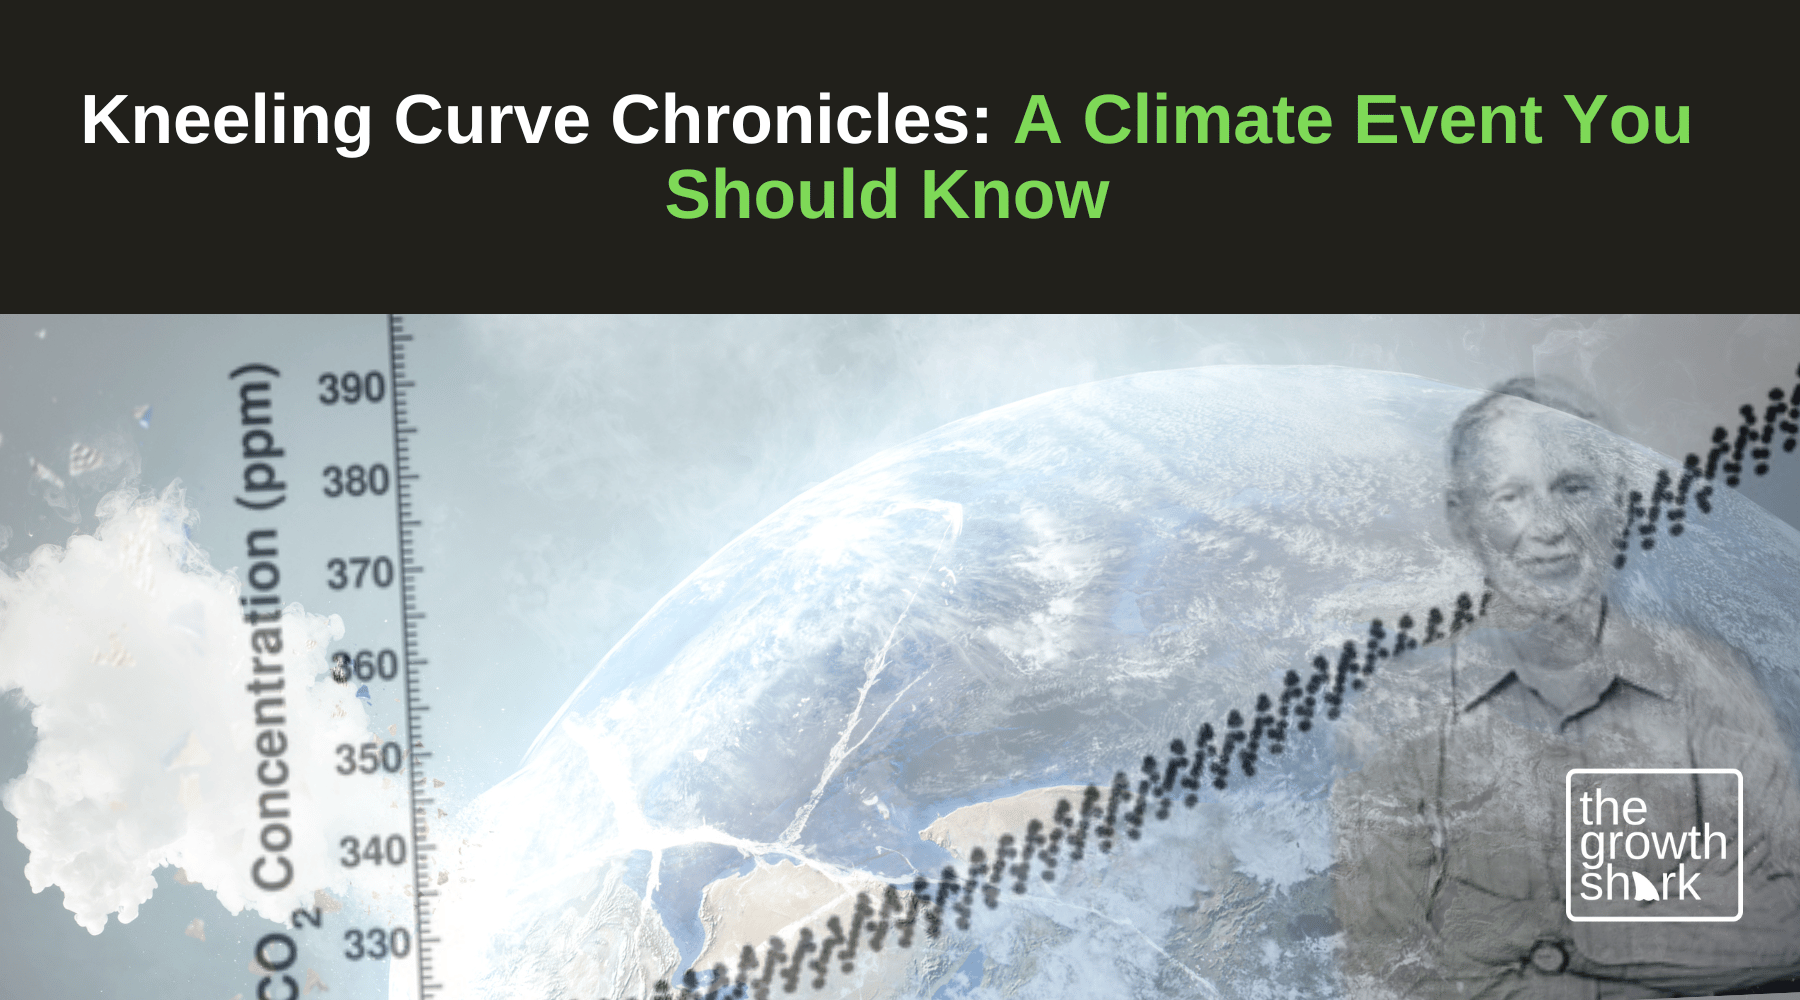 Kneeling Curve Chronicles: A Climate Event You Should Know